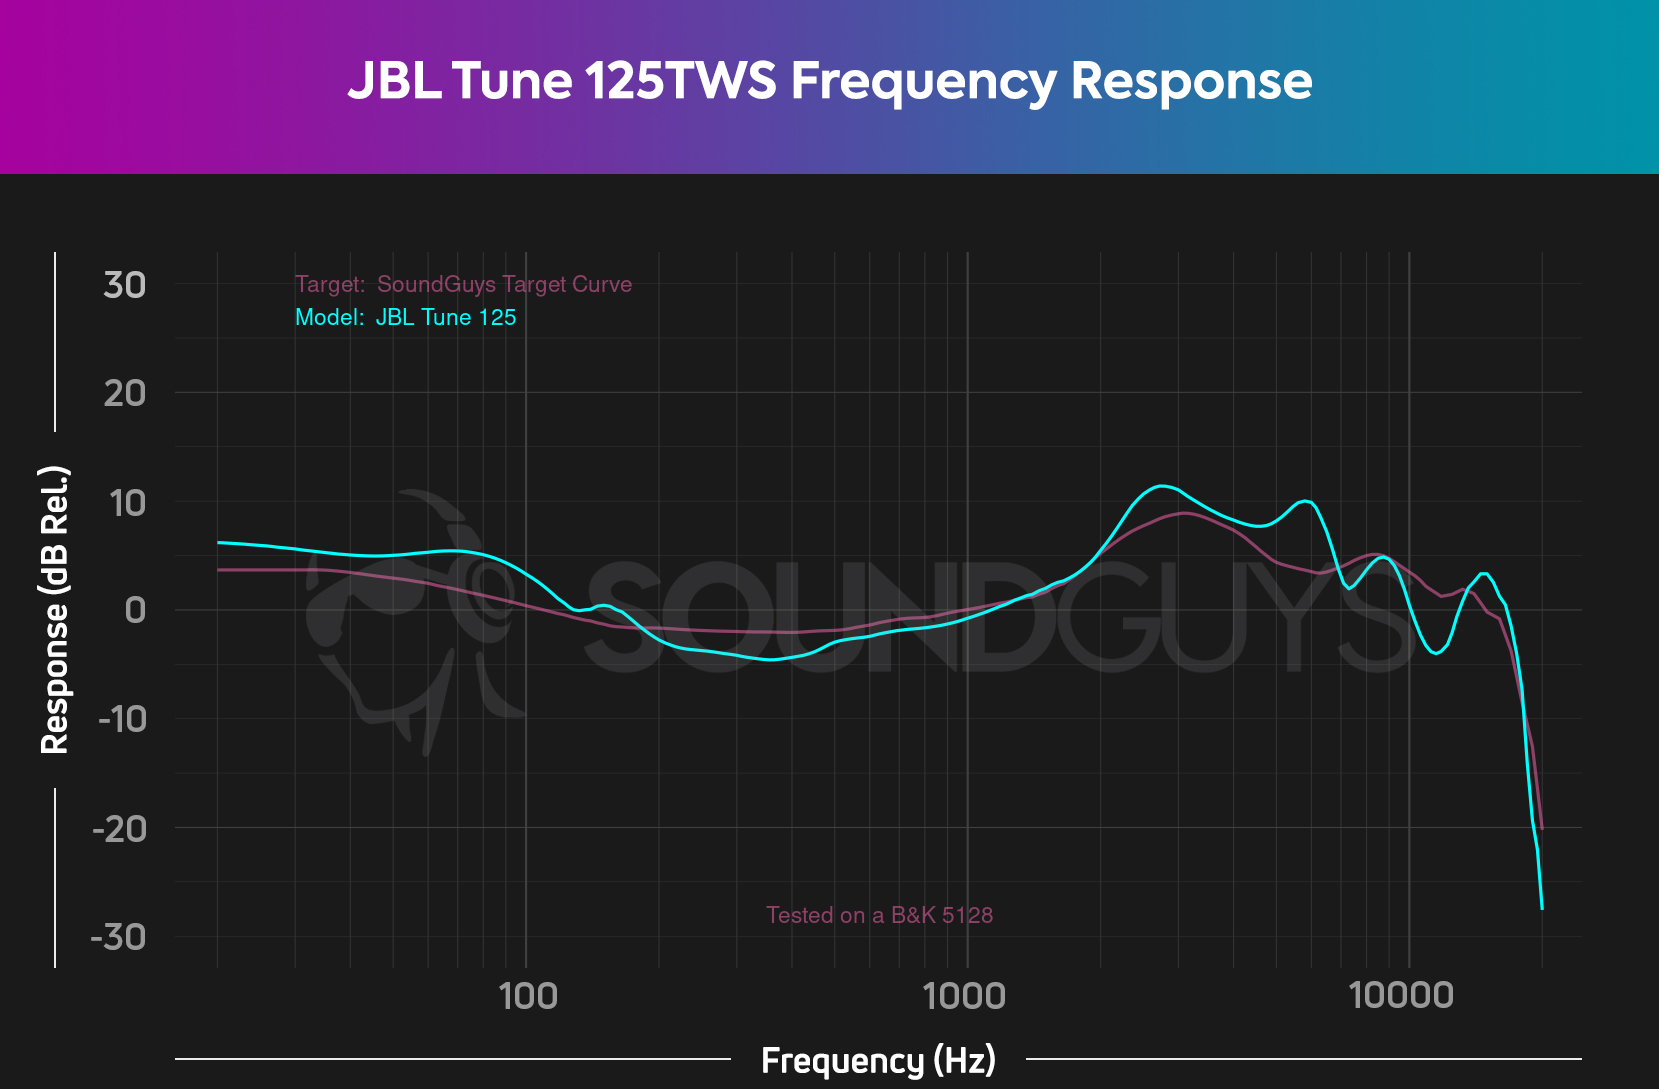 A chart shows the JBL Tune 125TWS fairly closely following our target frequency response curve.